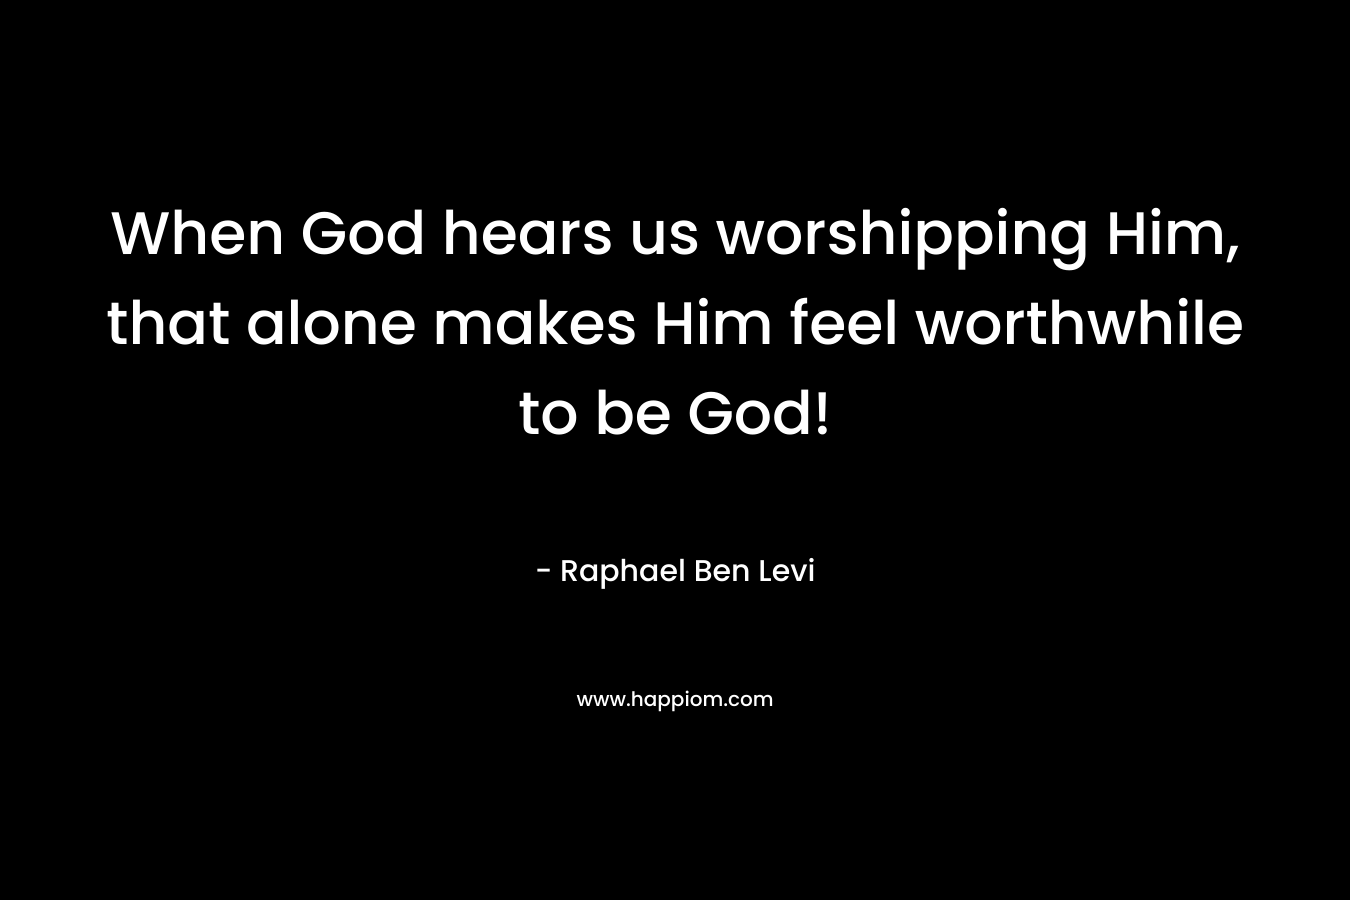 When God hears us worshipping Him, that alone makes Him feel worthwhile to be God!